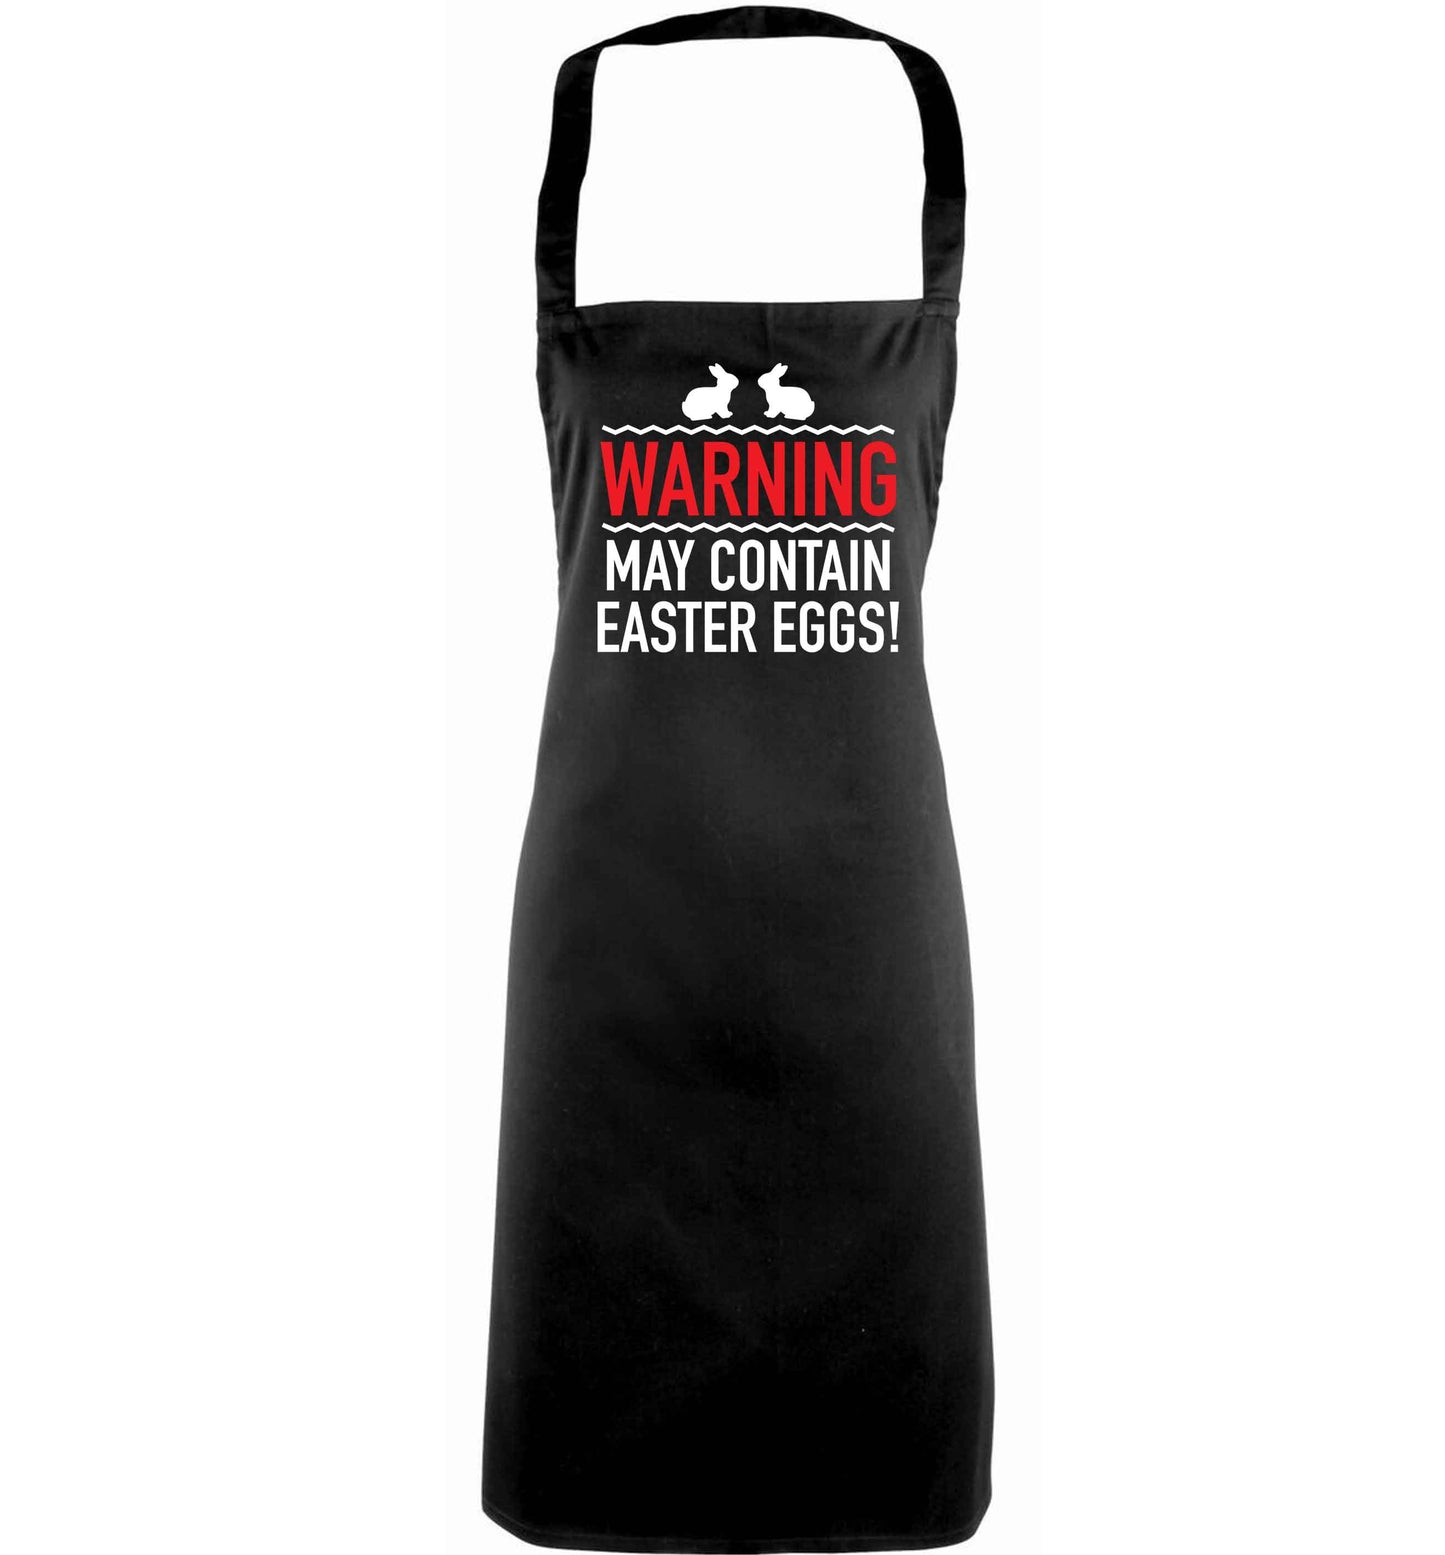 Warning may contain Easter eggs adults black apron